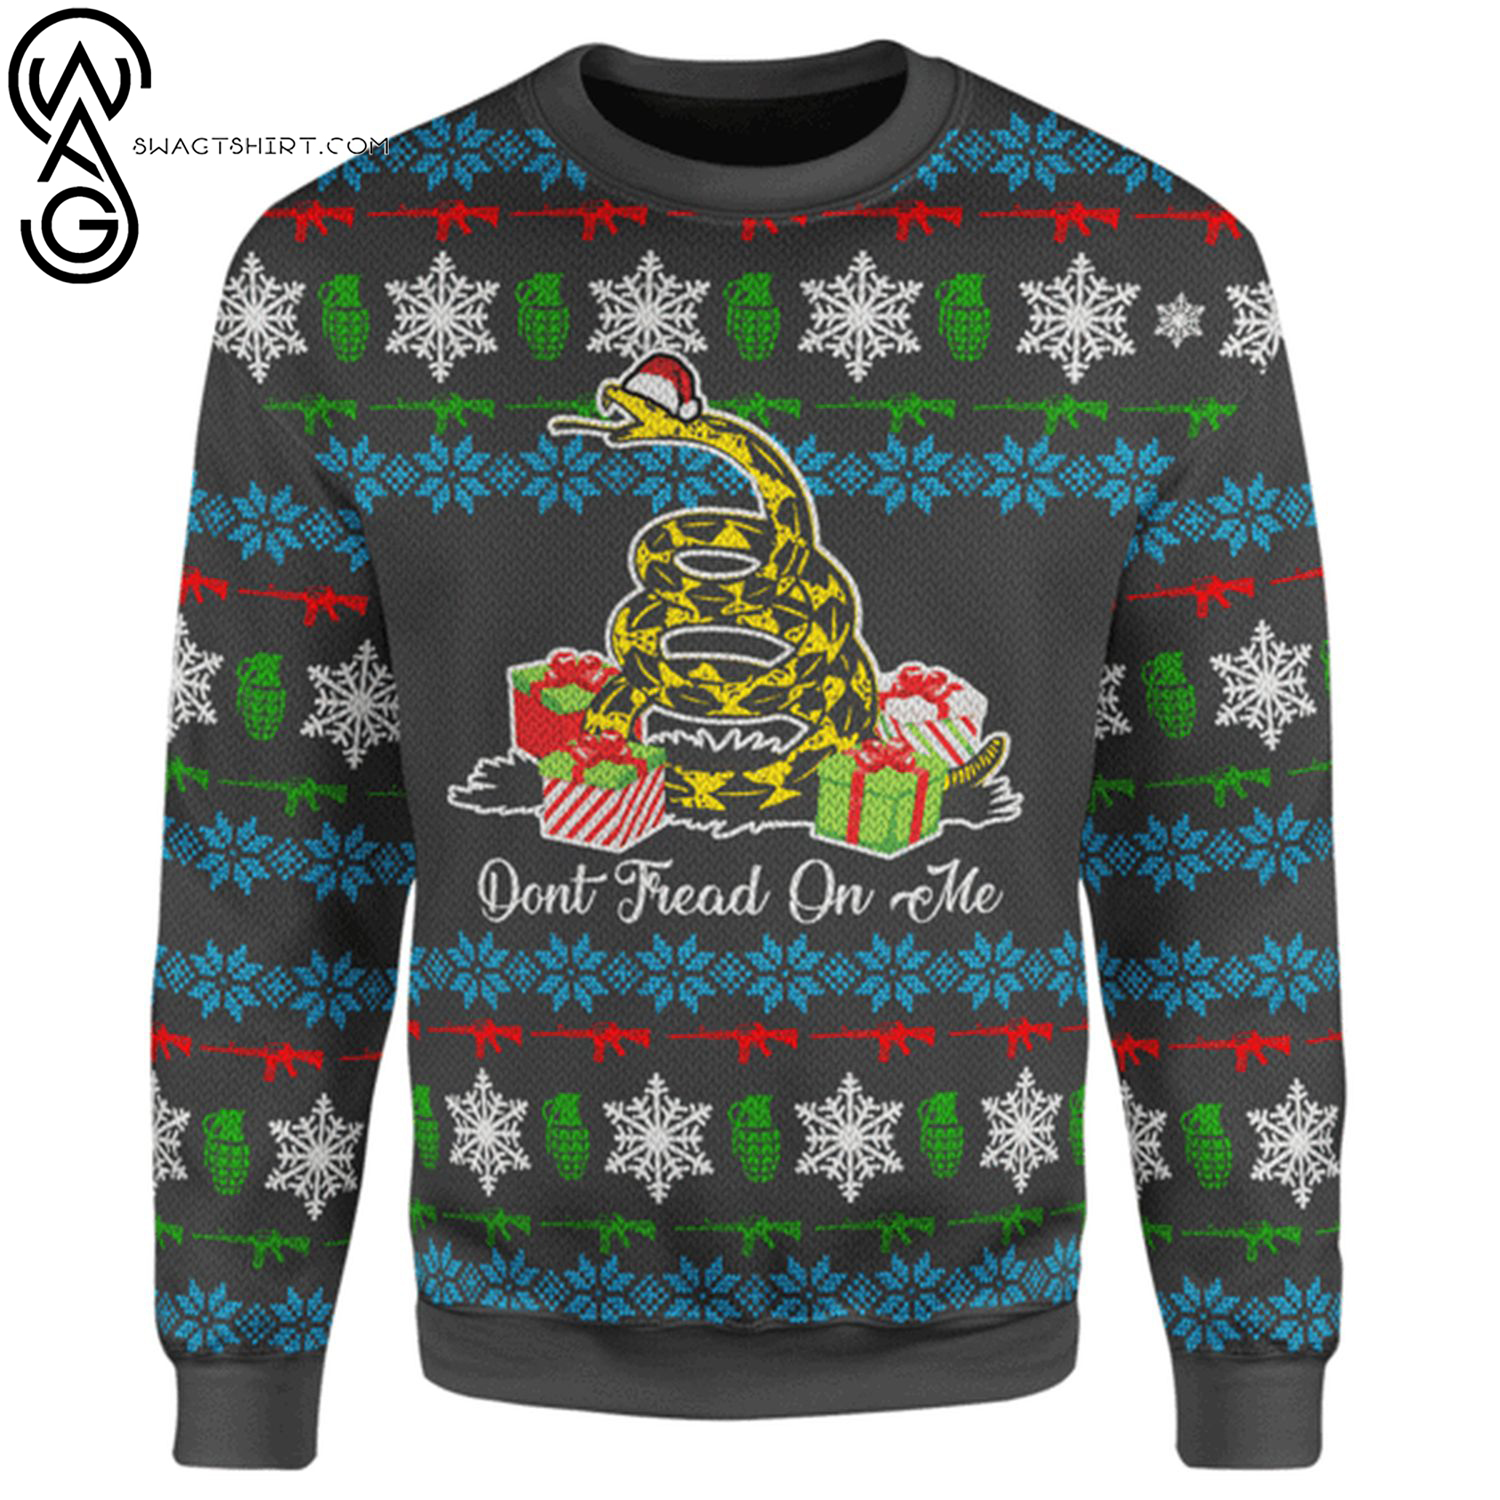 Don't tread on me gadsden flag ugly christmas sweater